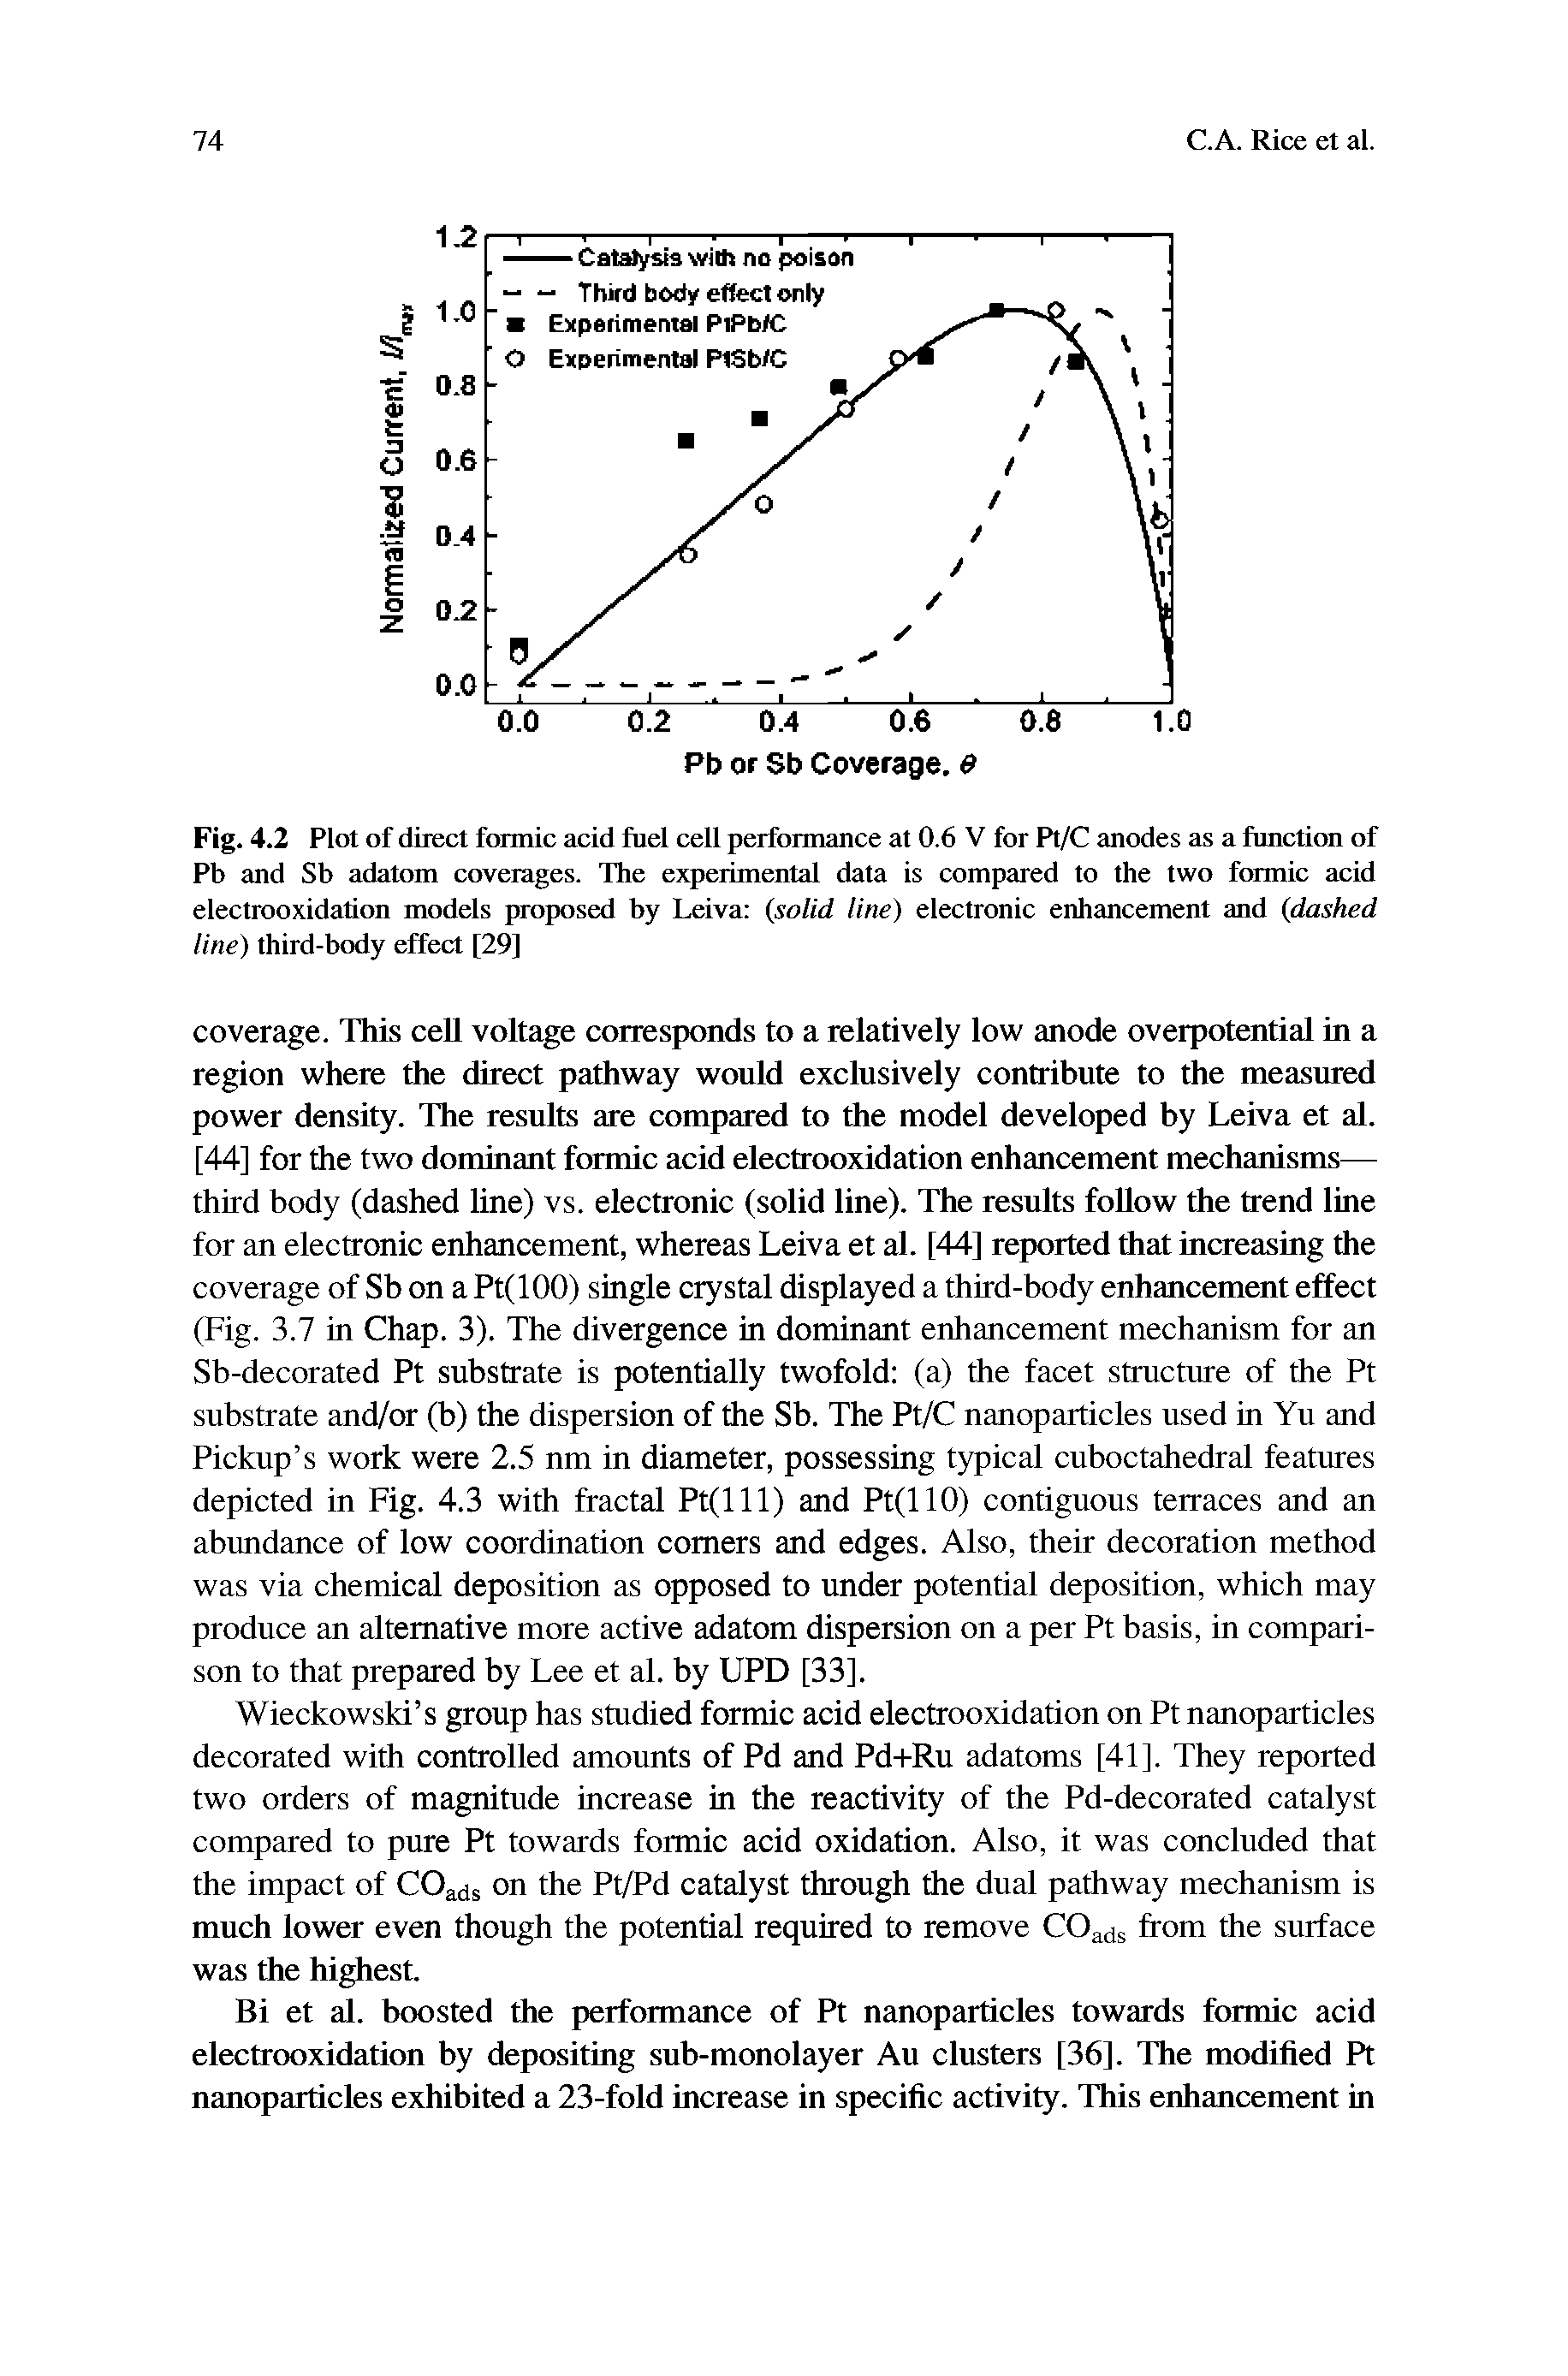 Fig. 4.2 Plot of direct formic acid fuel cell performance at 0.6 V for Pt/C anodes as a function of Pb and Sb adatom coverages. The experimental data is compared to the two formic acid electrooxidation models proposed by Leiva (solid line) electronic enhancement and (dashed line) third-body effect [29]...